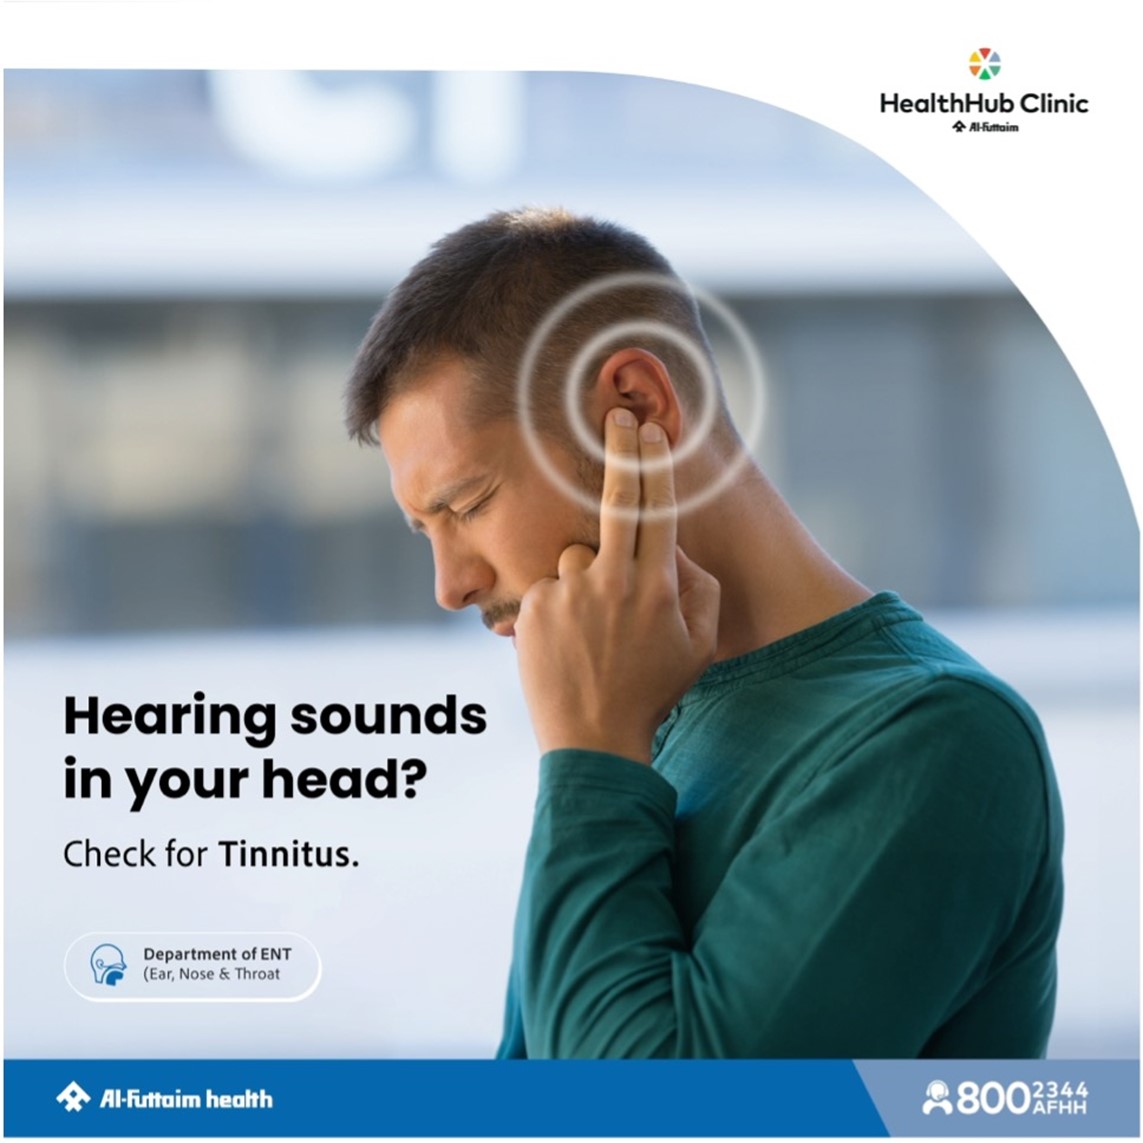 Tinnitus - Symptoms, Causes, Risk Factors, and Treatment